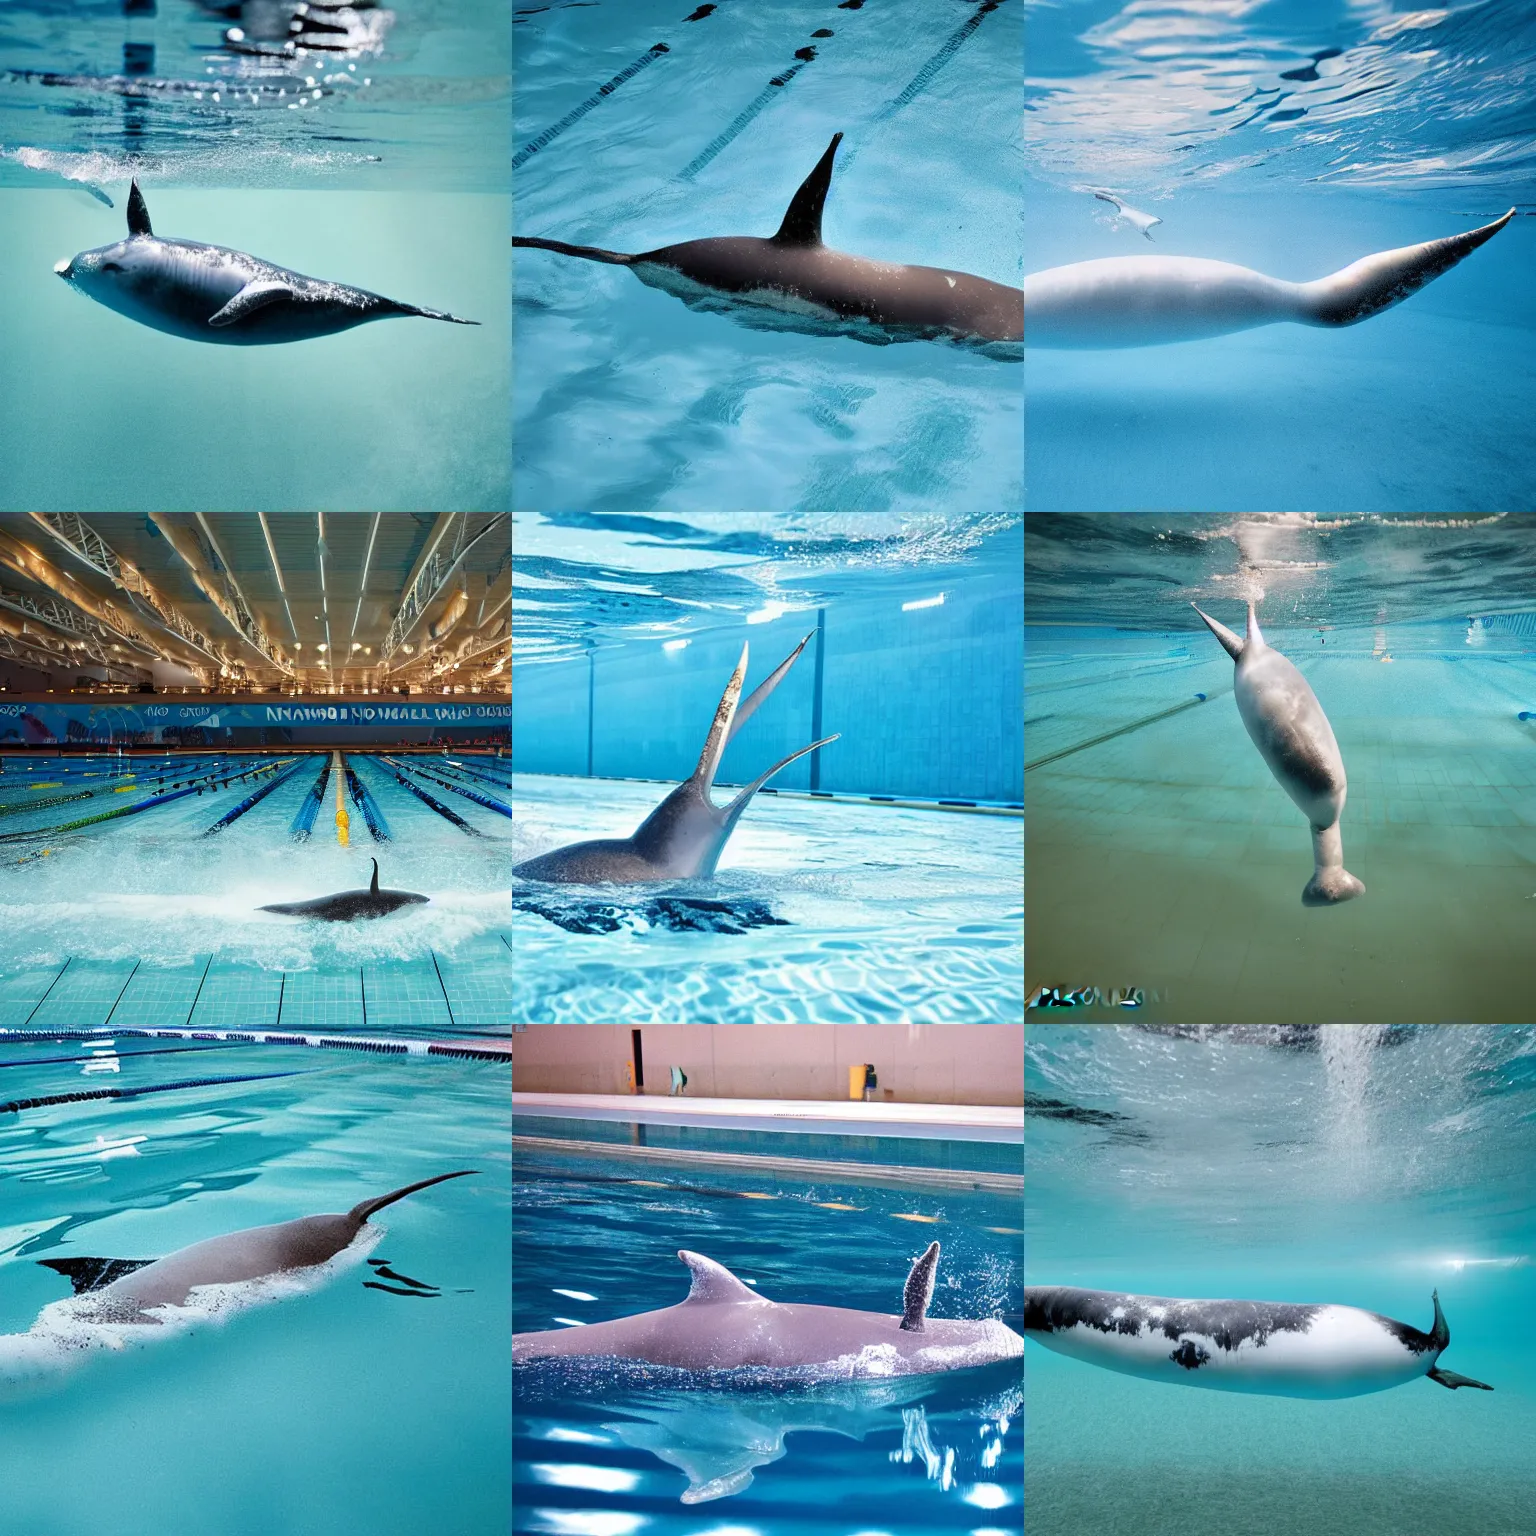 Prompt: A narwhal in an Olympic swimming pool, award winning nature photography by National Geographic